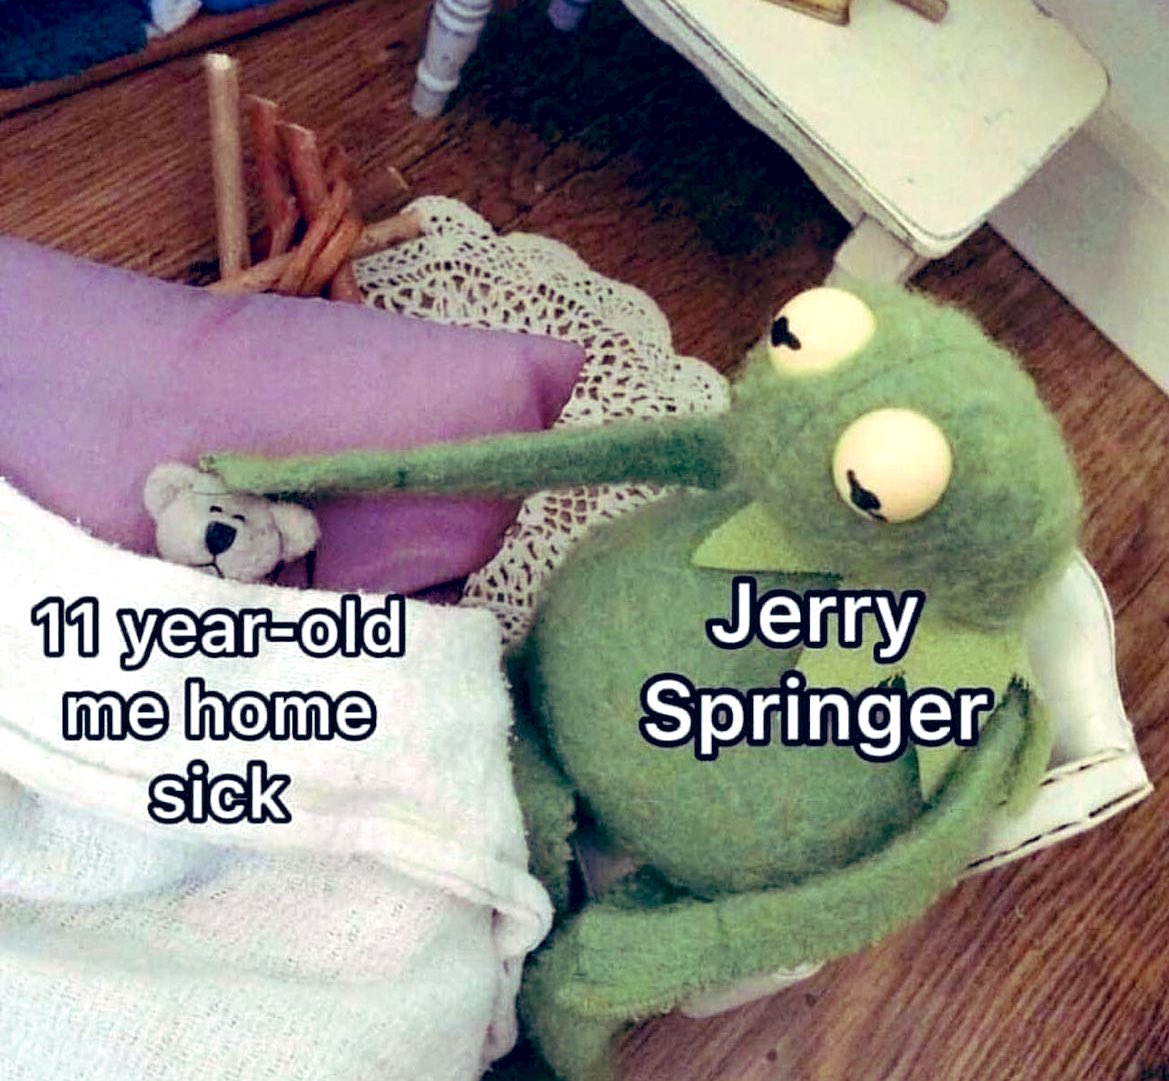 This isn’t mine but I saw this and for reals it was exactly like that. #RIPJerrySpringer 🖤🖤🖤